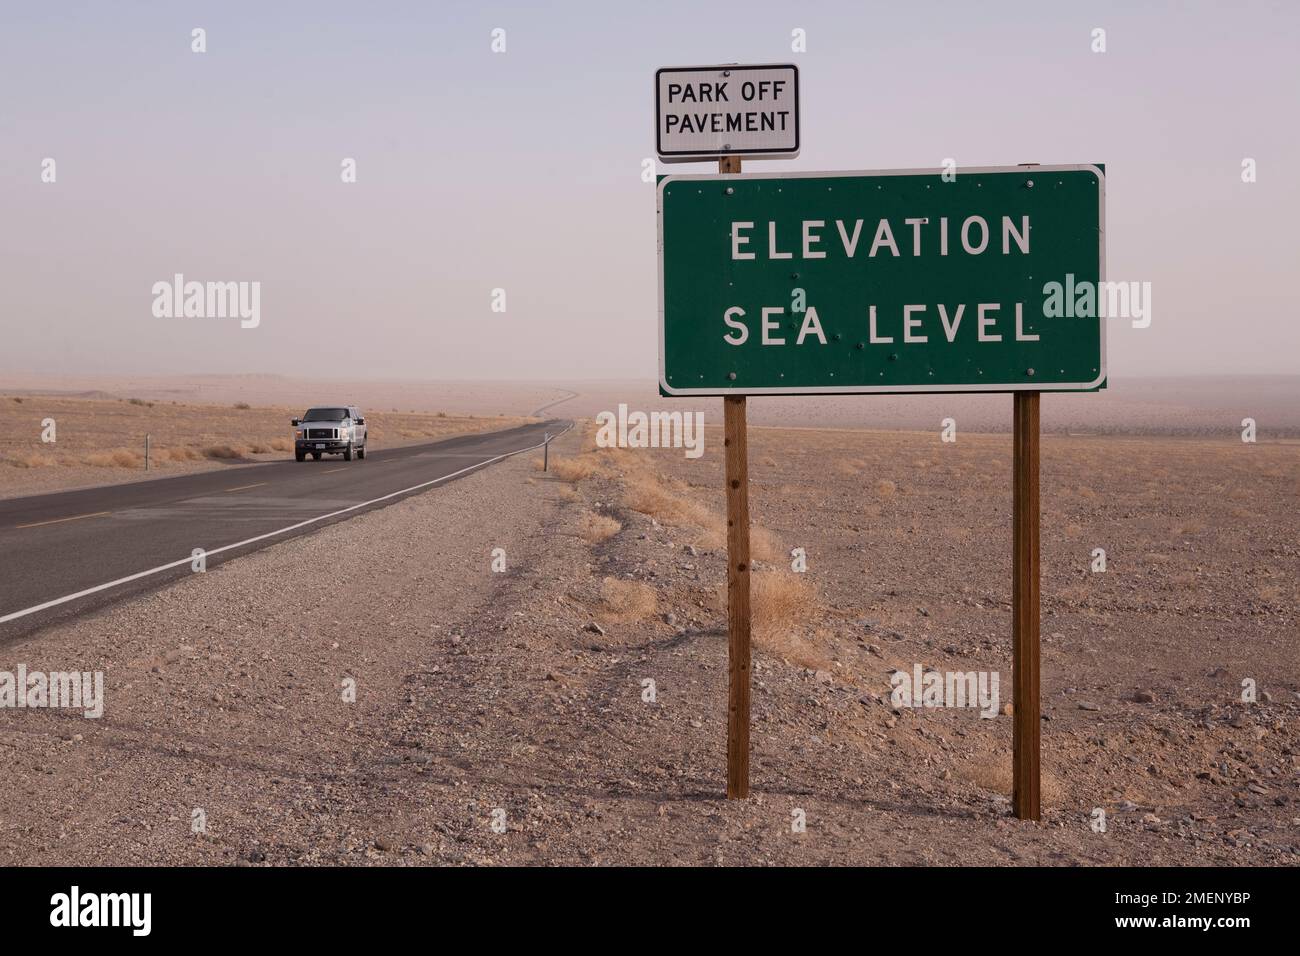 Elevation Sea Level sign and car on straight road at Death Valley National Park, California Stock Photo